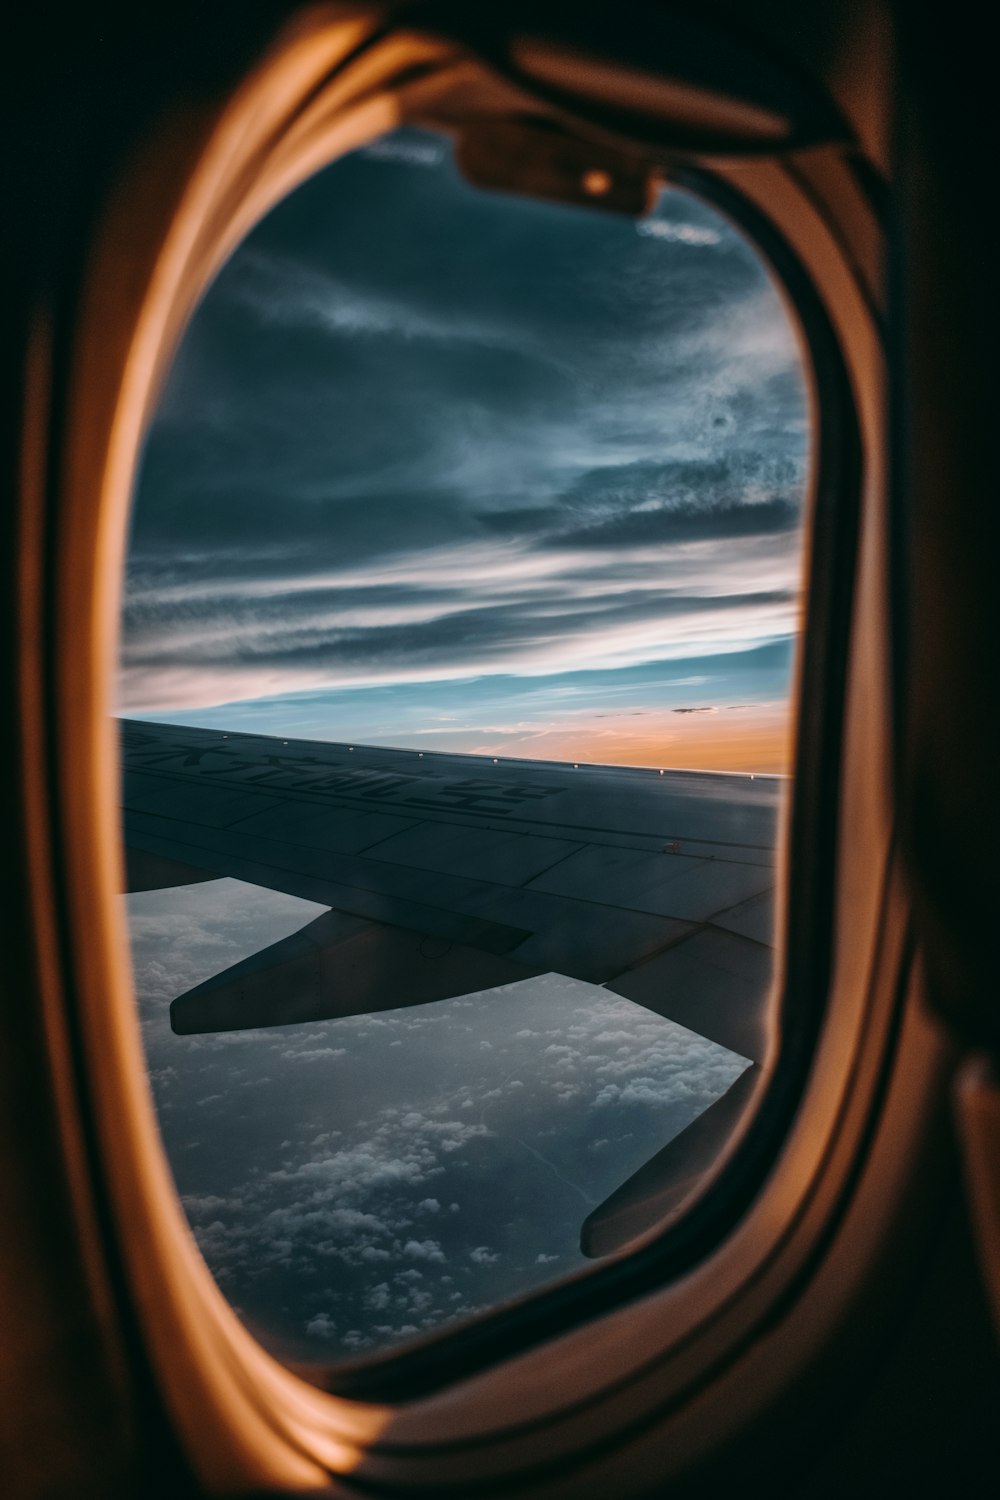 a view of the wing of an airplane from the window